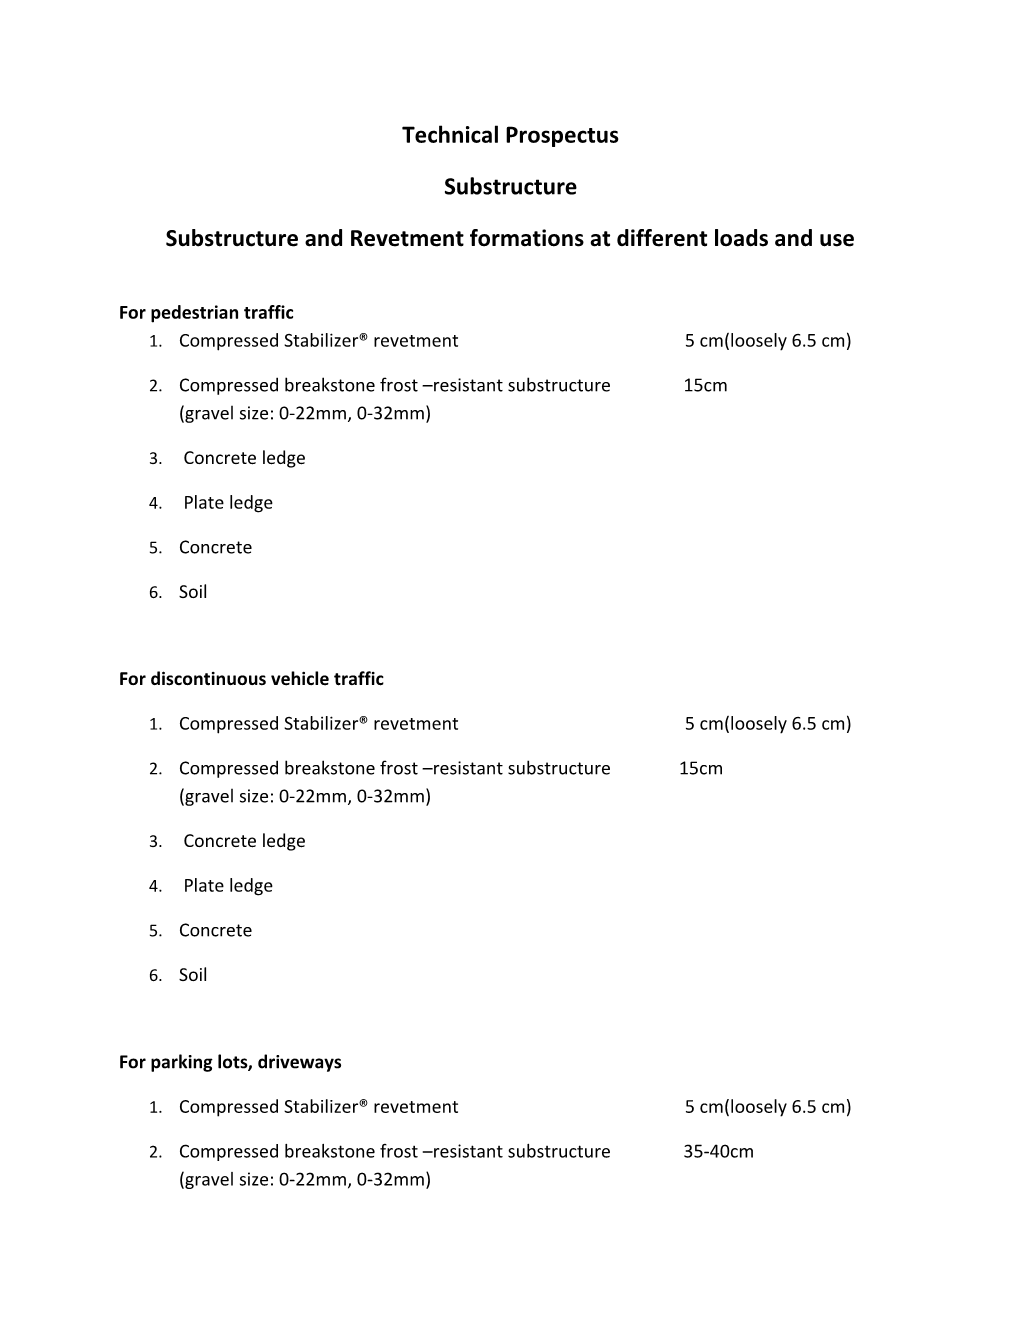 Substructure and Revetment Formations at Different Loads and Use